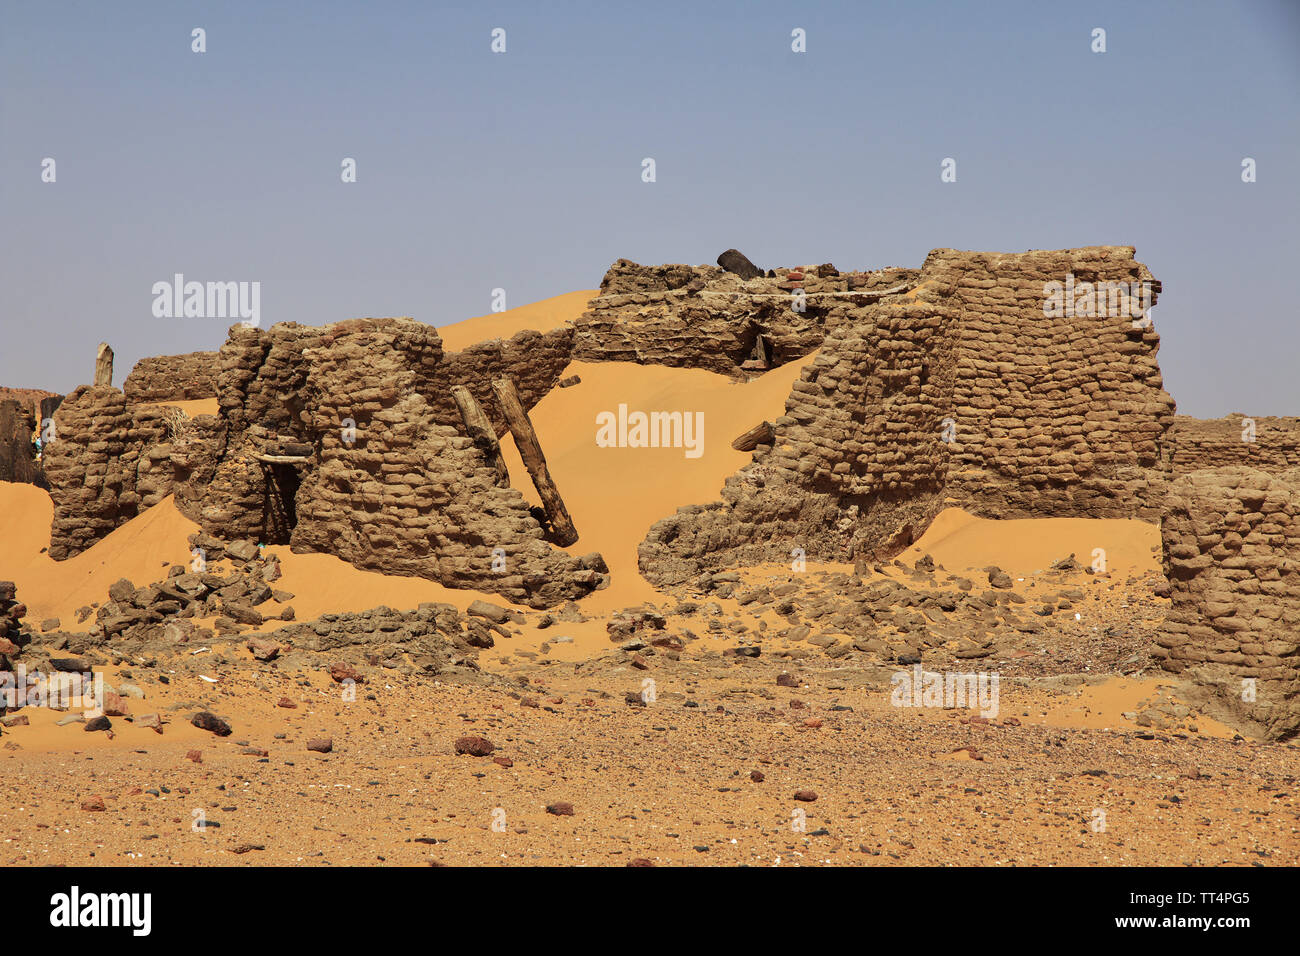 Old Dongola in Sudan, Africa Foto Stock